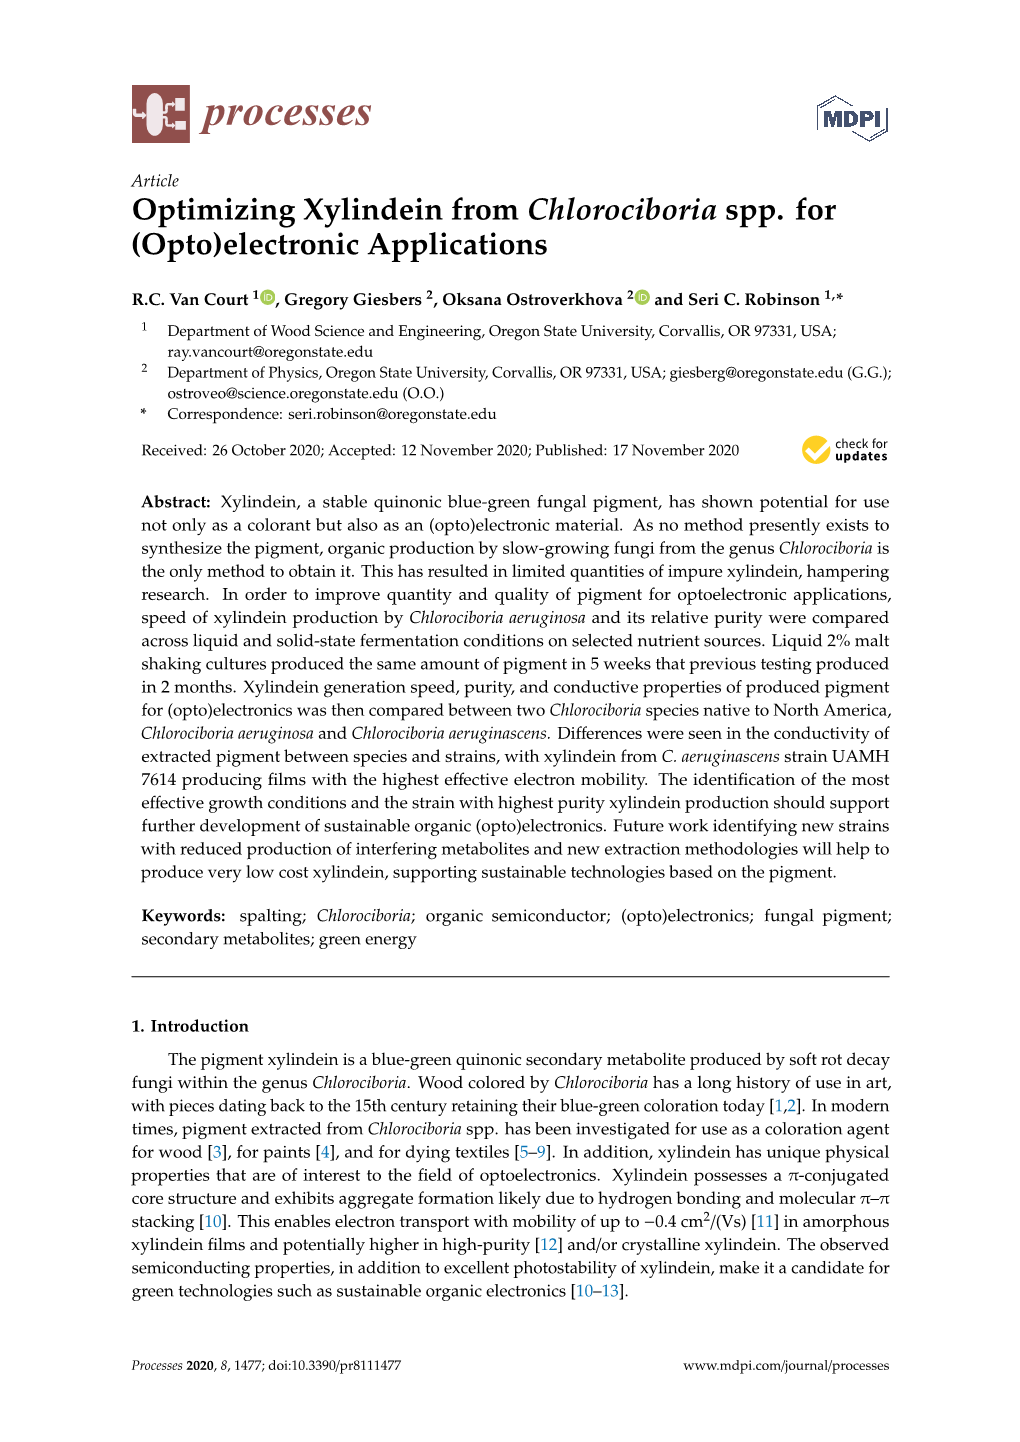 Optimizing Xylindein from Chlorociboria Spp. for (Opto)Electronic Applications